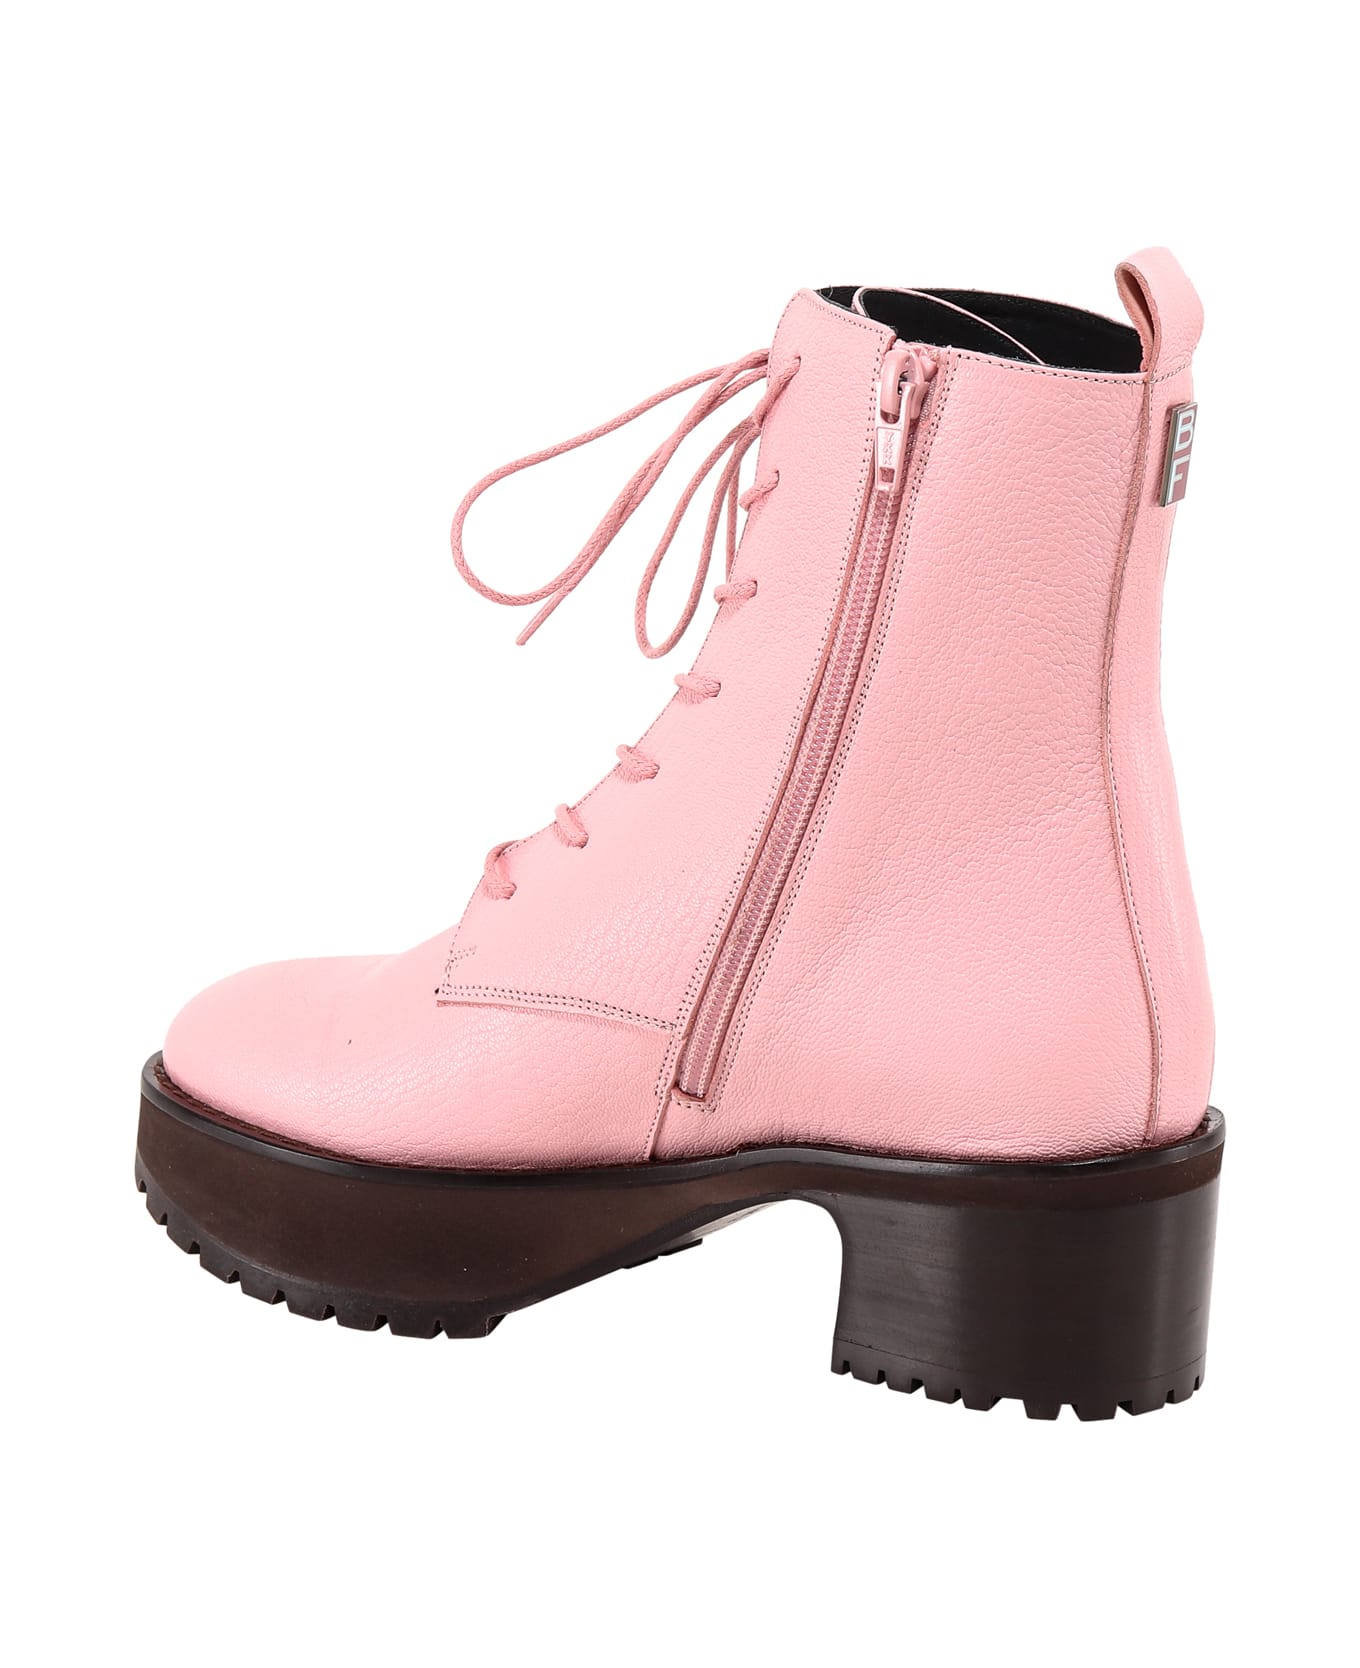 BY FAR Ankle Boots - Pink ブーツ